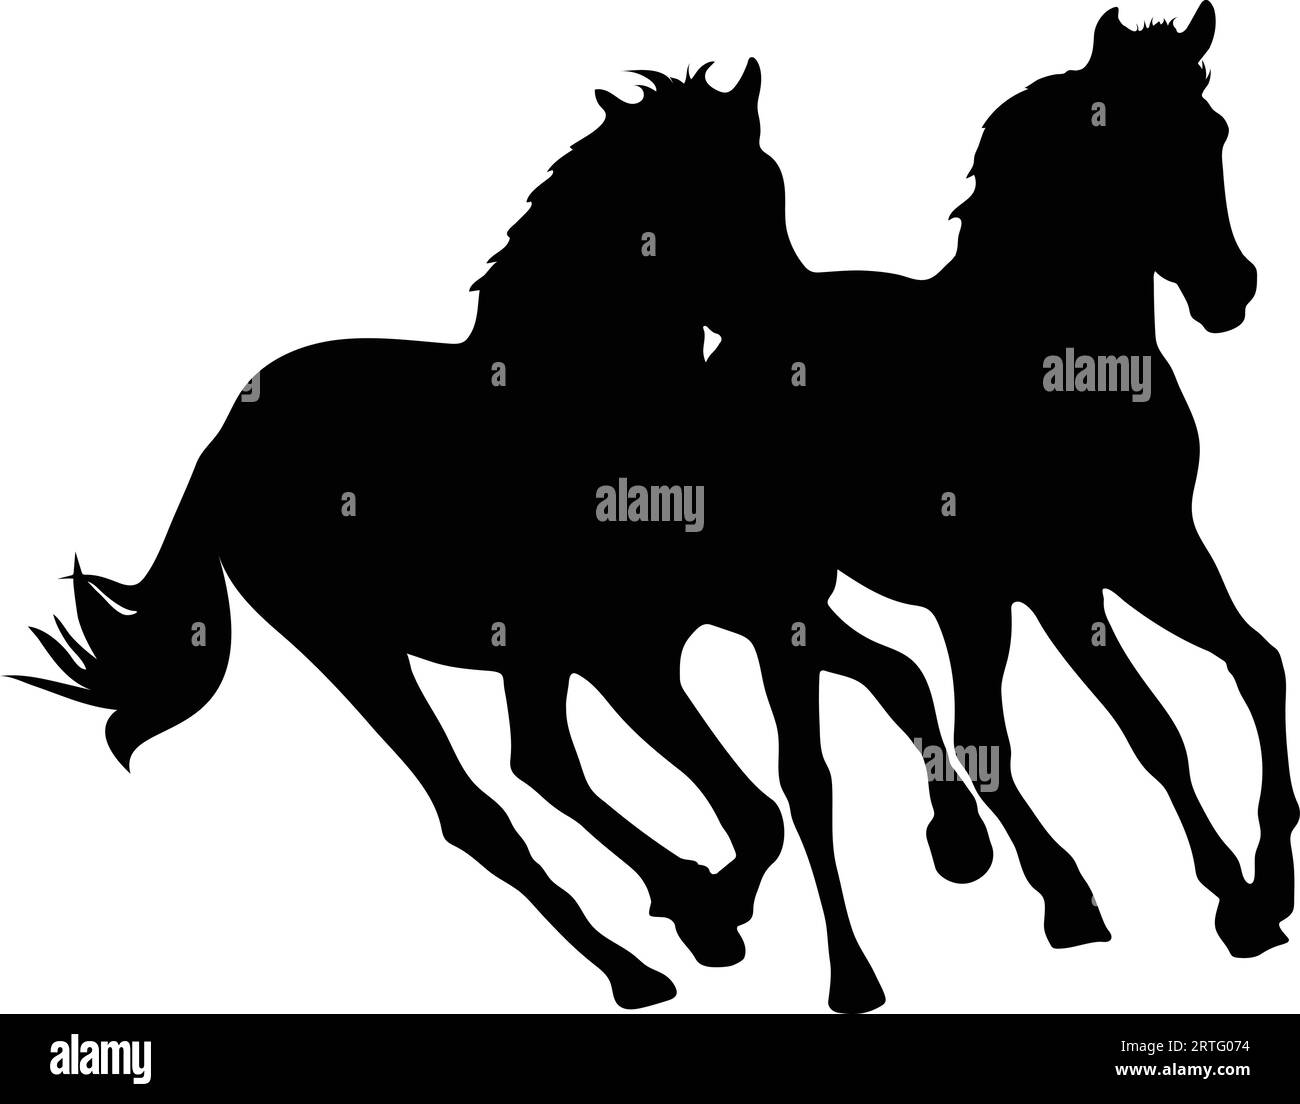 Two horses running together silhouette or vector Stock Vector